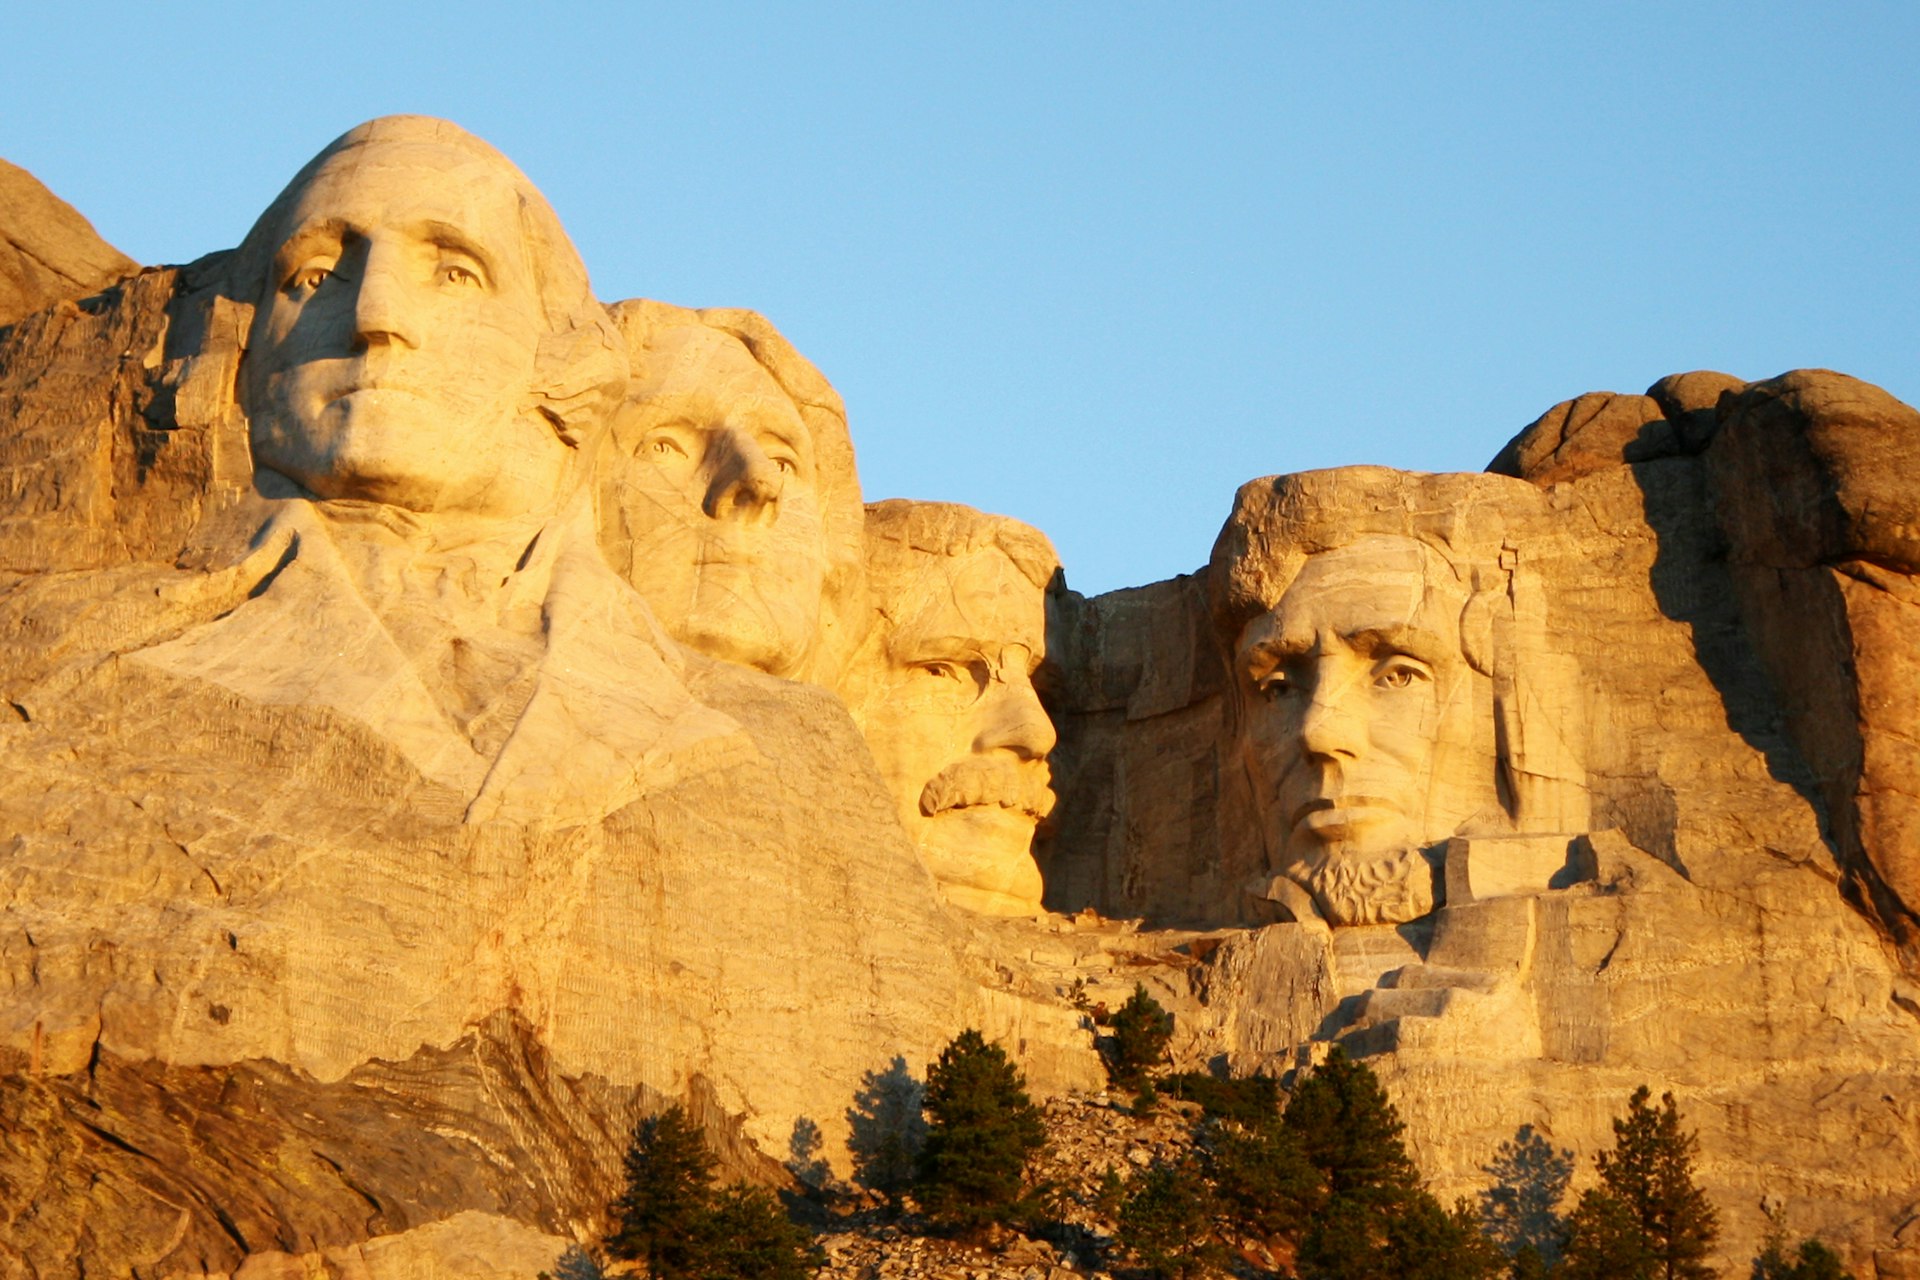 Mt Rushmore at dawn. Image by Alexander Howard / Lonely Planet